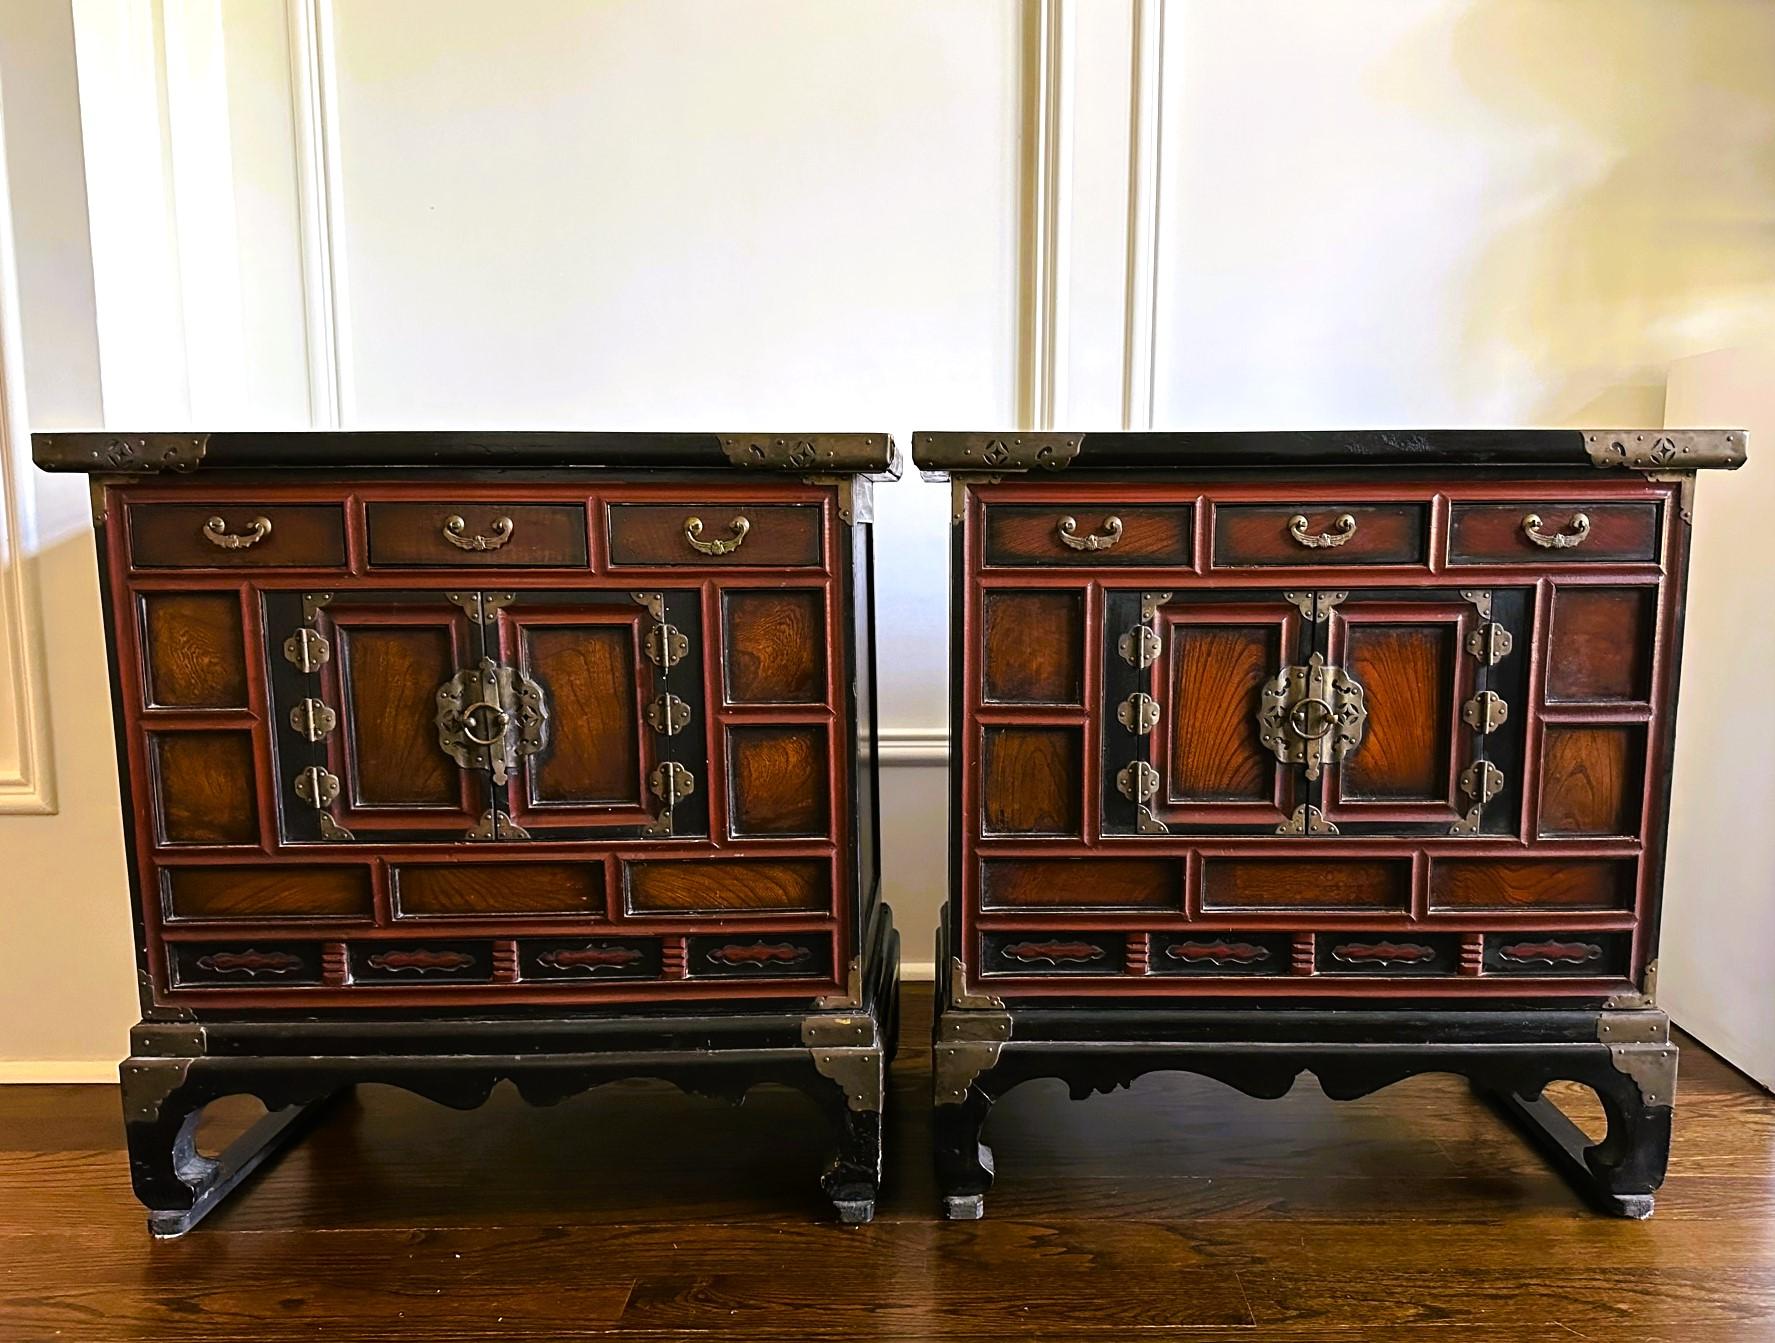 A rare pair of Korean lacquered wood cabinet dated to the late Joseon Dynasty toward the end of the 19th century. The cabinet was known as 